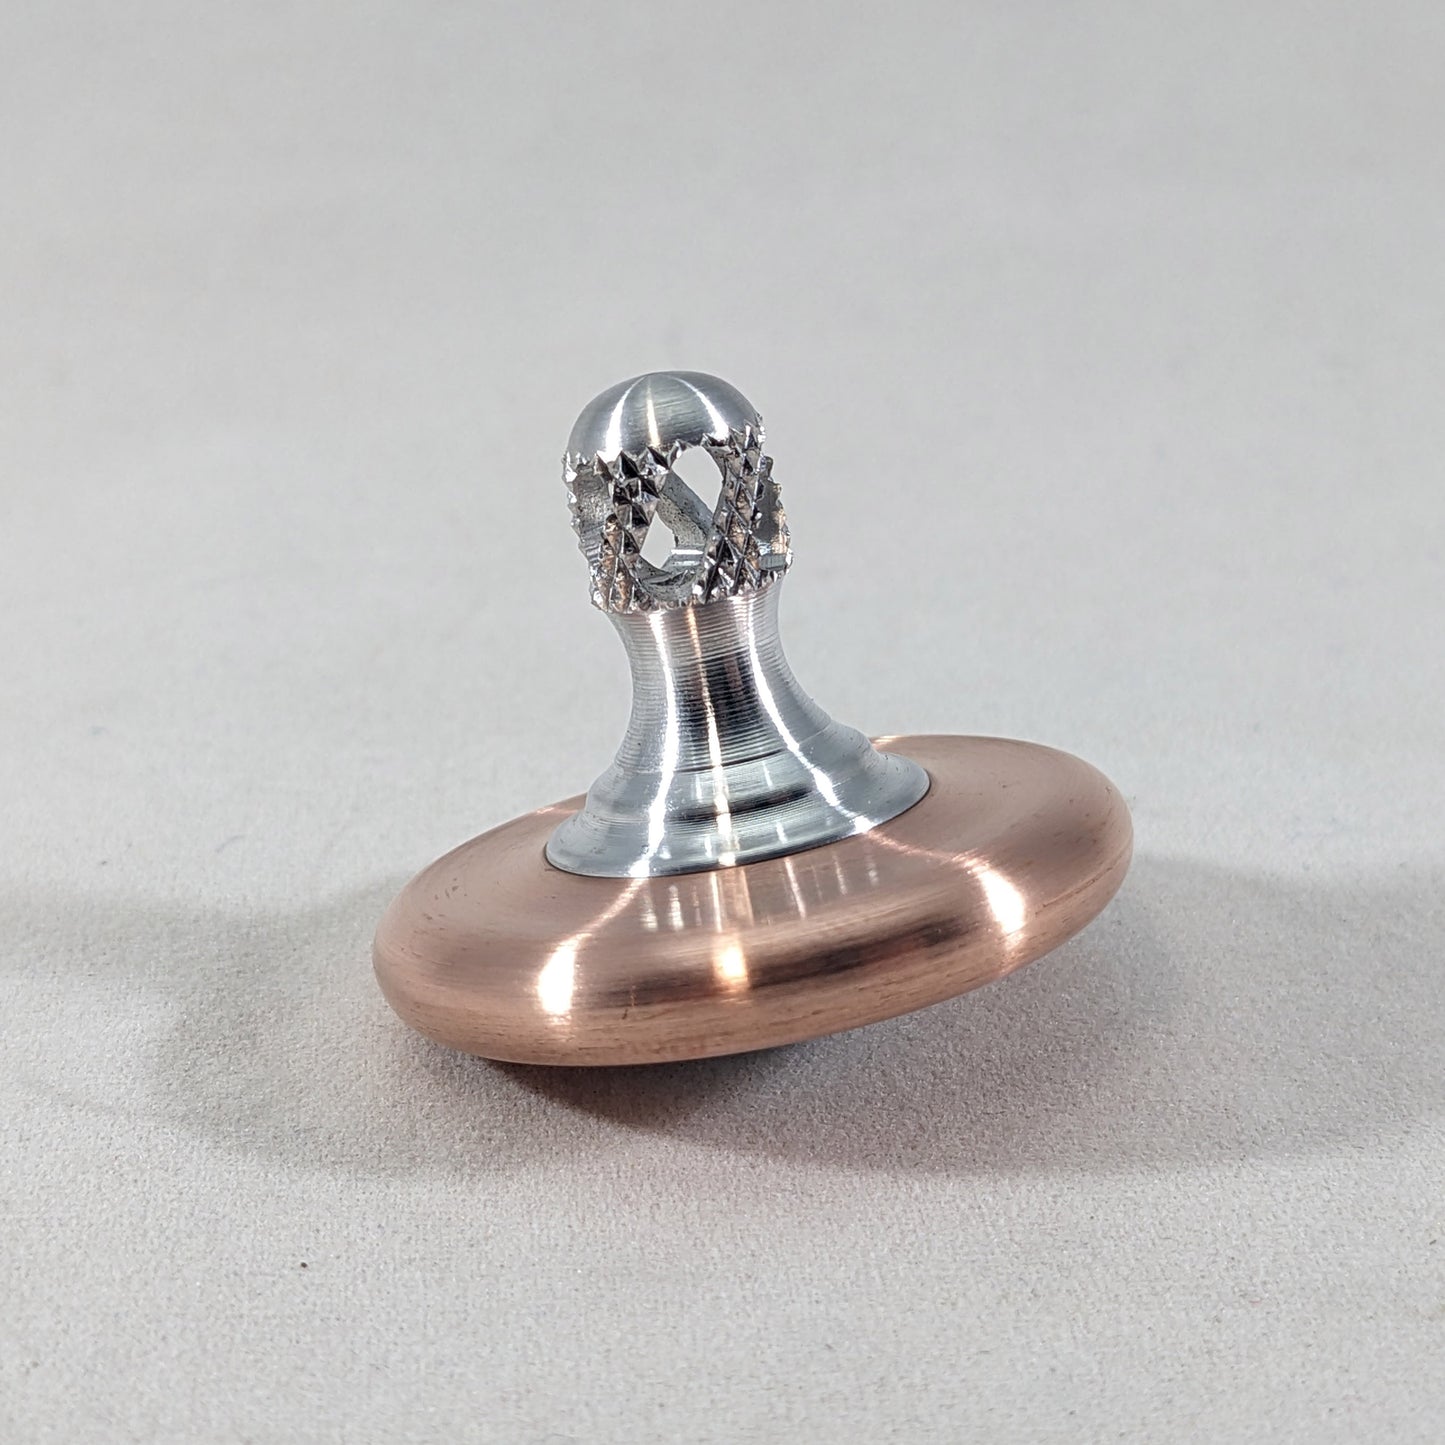 M3 - Brushed Copper & Aluminum Spin Top SG